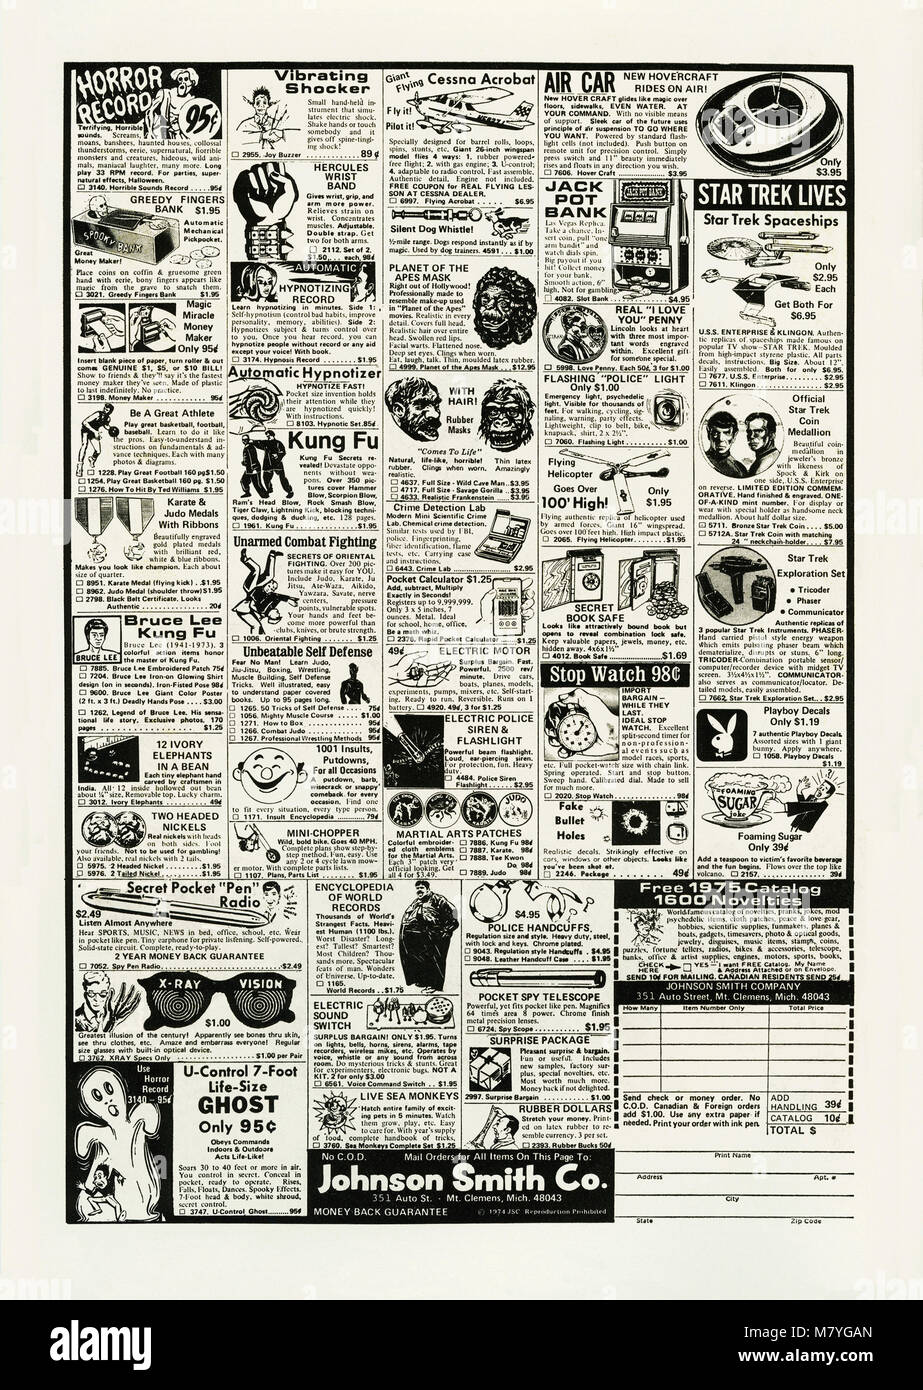 1975 advert for Johnson Smith Company novelty items. It appeared in an American children's comic. The mail-order company was based in Mount Clemens, Michigan, USA. On sale in a 'small ad' style layout are such items as 'X-ray' vision glasses, a 7-foot tall 'ghost', 'Planet of the Apes' rubber face masks, Star Trek merchandising and martial arts guides. Most items retail at much less than $5 and some for less than $1. Stock Photo